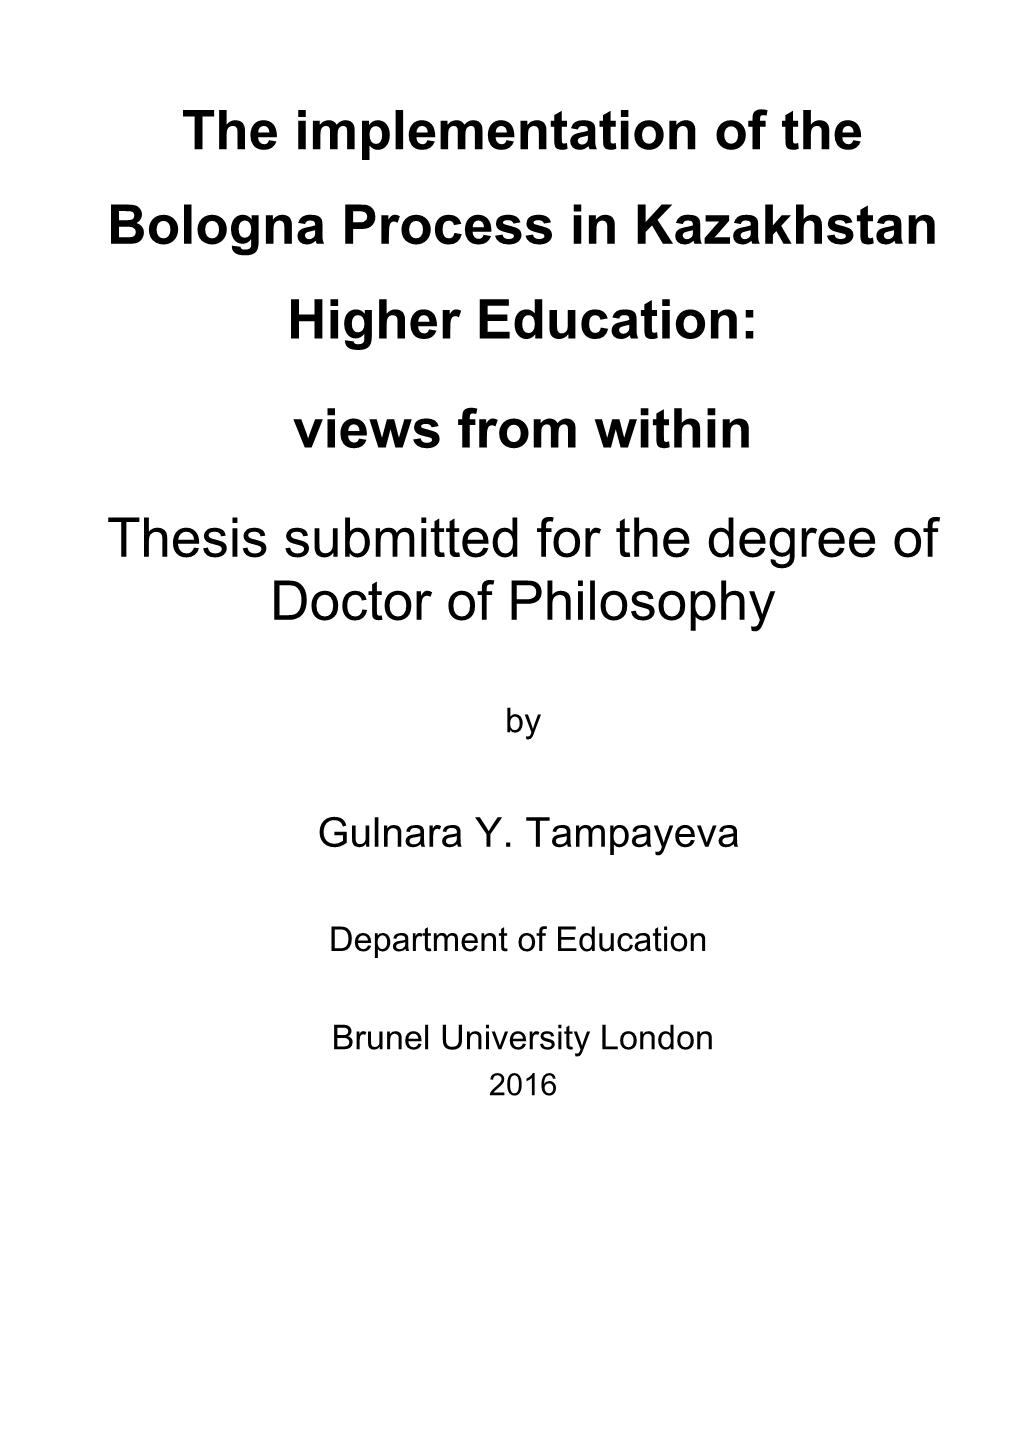 The Implementation of the Bologna Process in Kazakhstan Higher Education: Views from Within Thesis Submitted for the Degree of Doctor of Philosophy